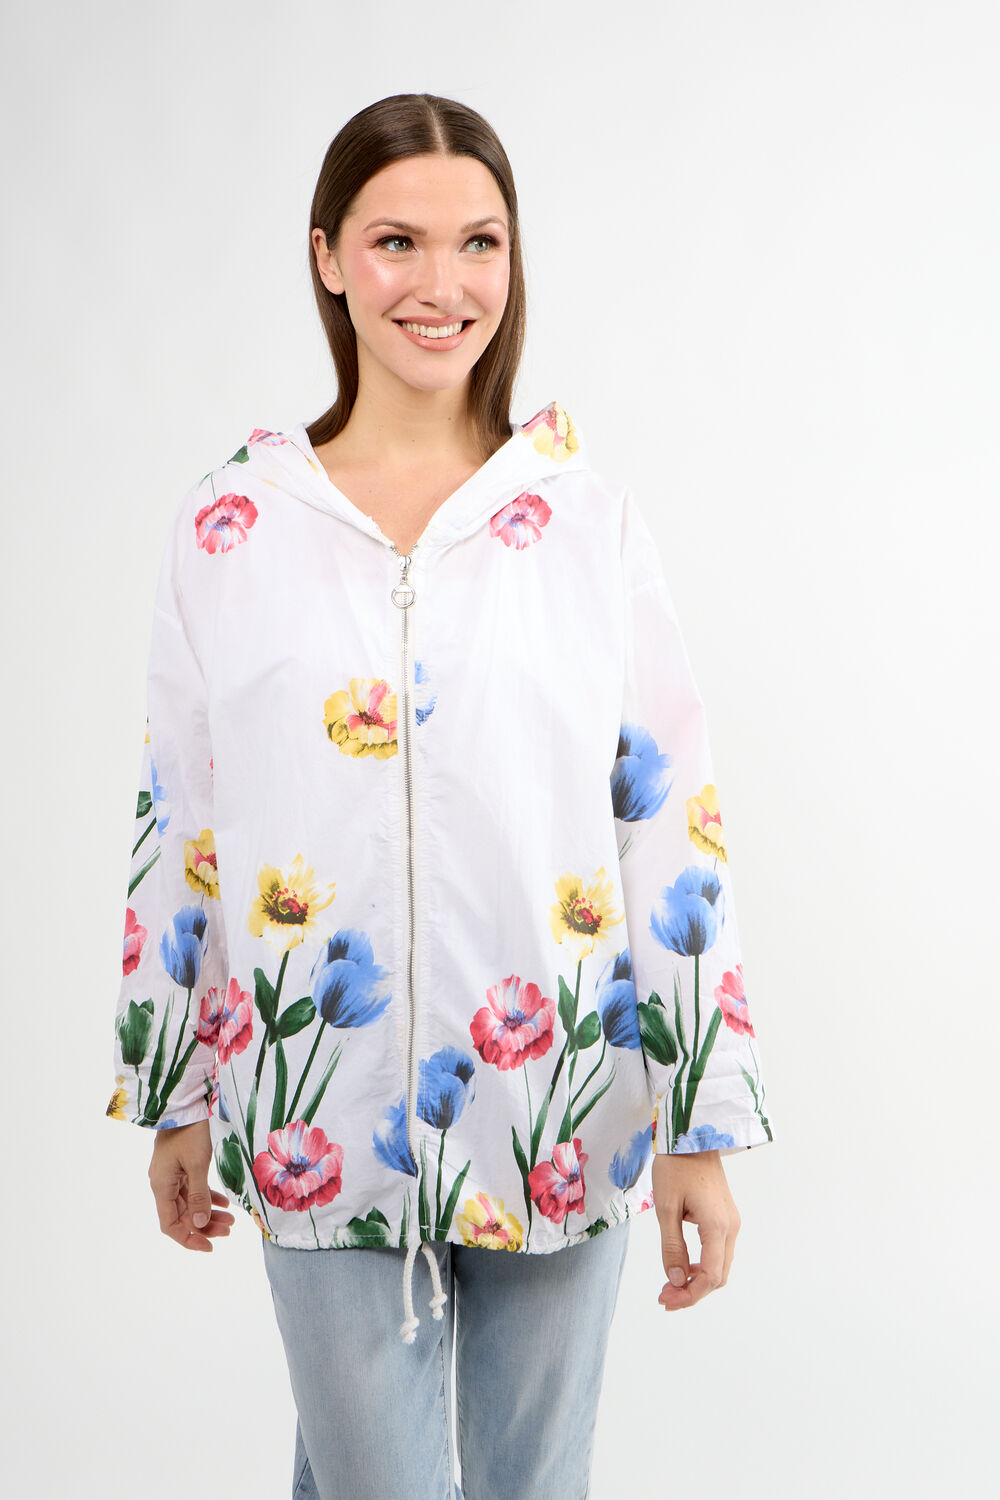 Hooded Floral Oversized Jacket Style 80210-6100. As Sample